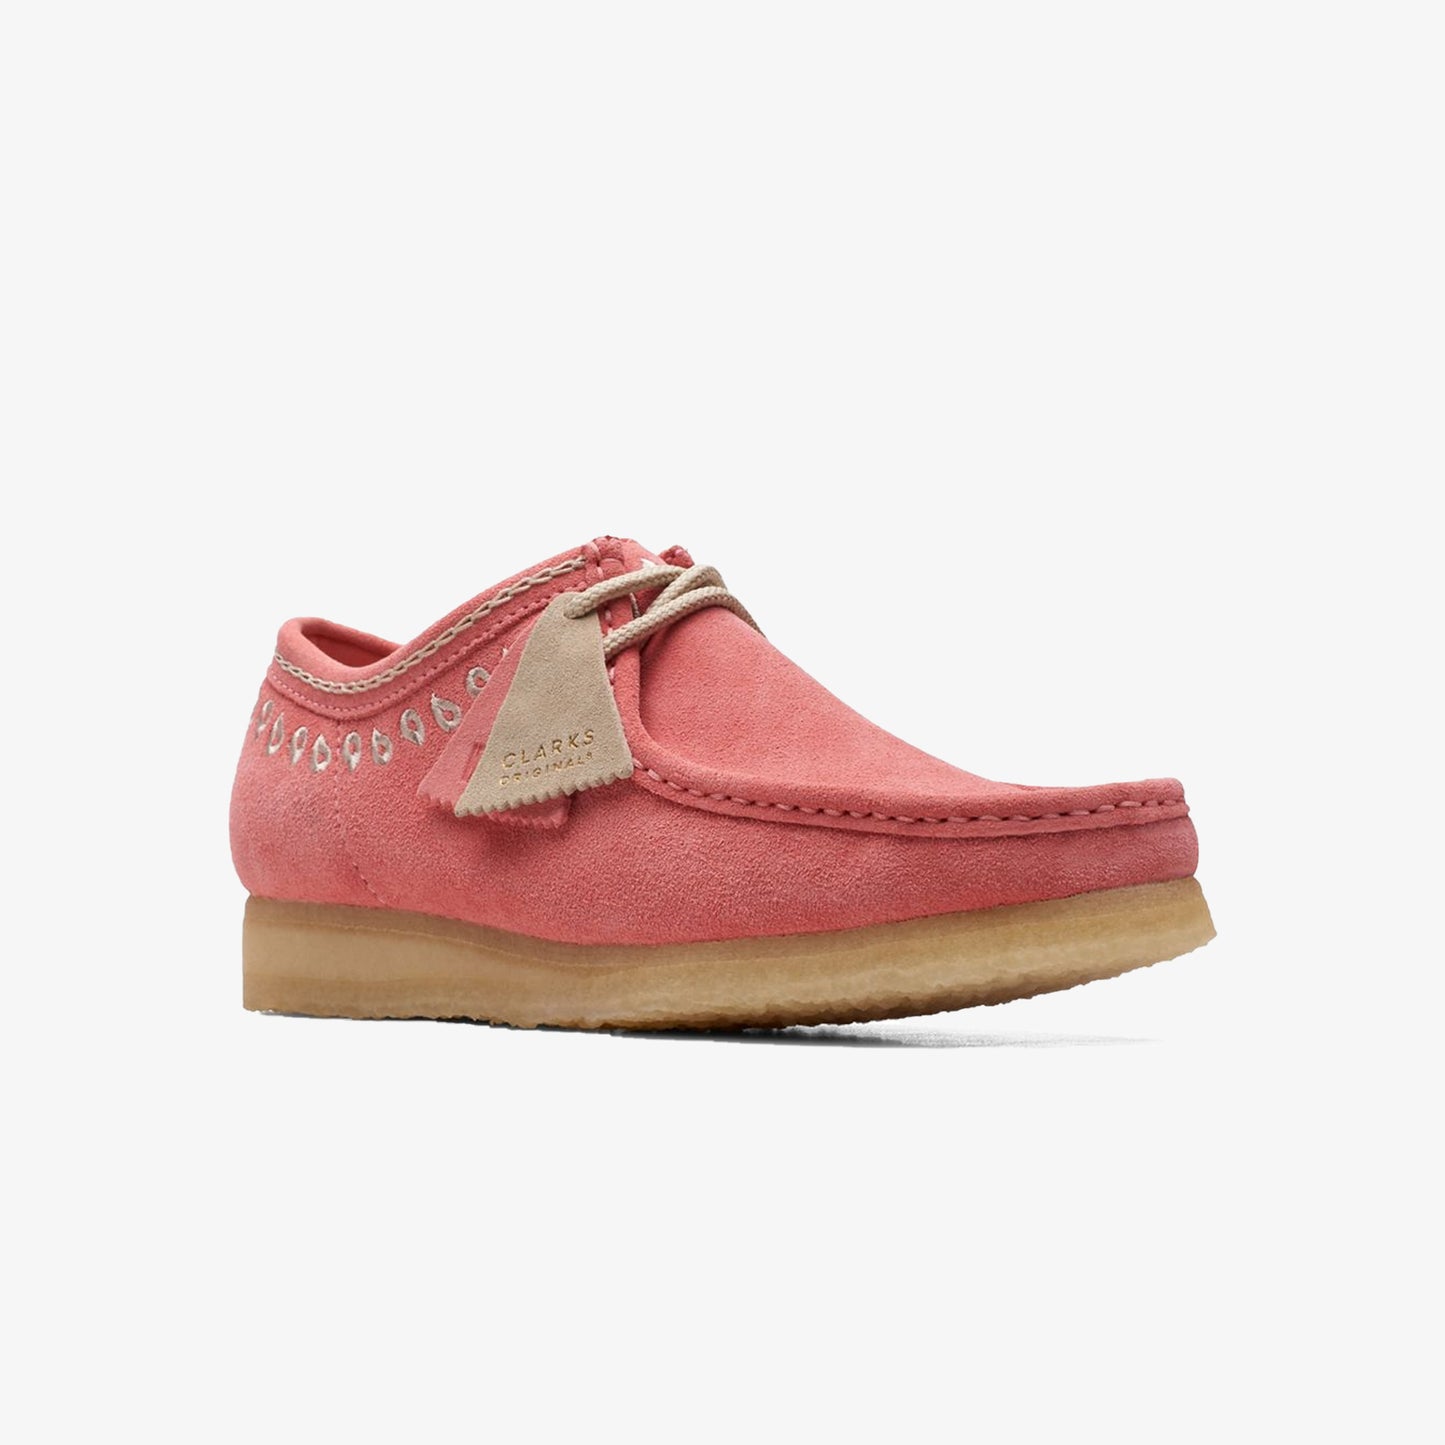 WALLABEE 'PINK'